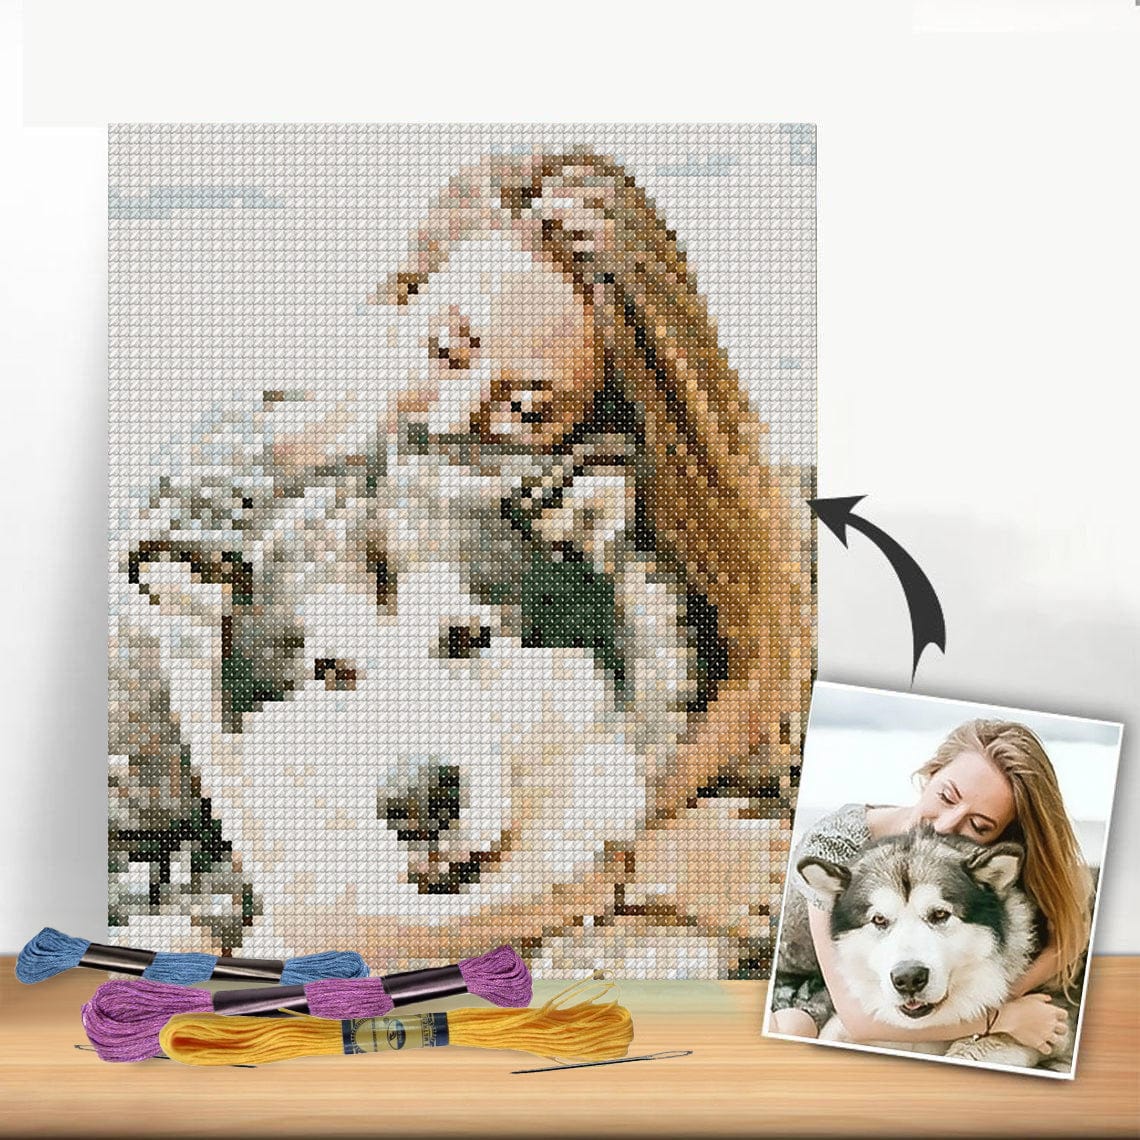 Cross Stitch | Wolf - Black And Brown Wolf Painting - Cross Stitched